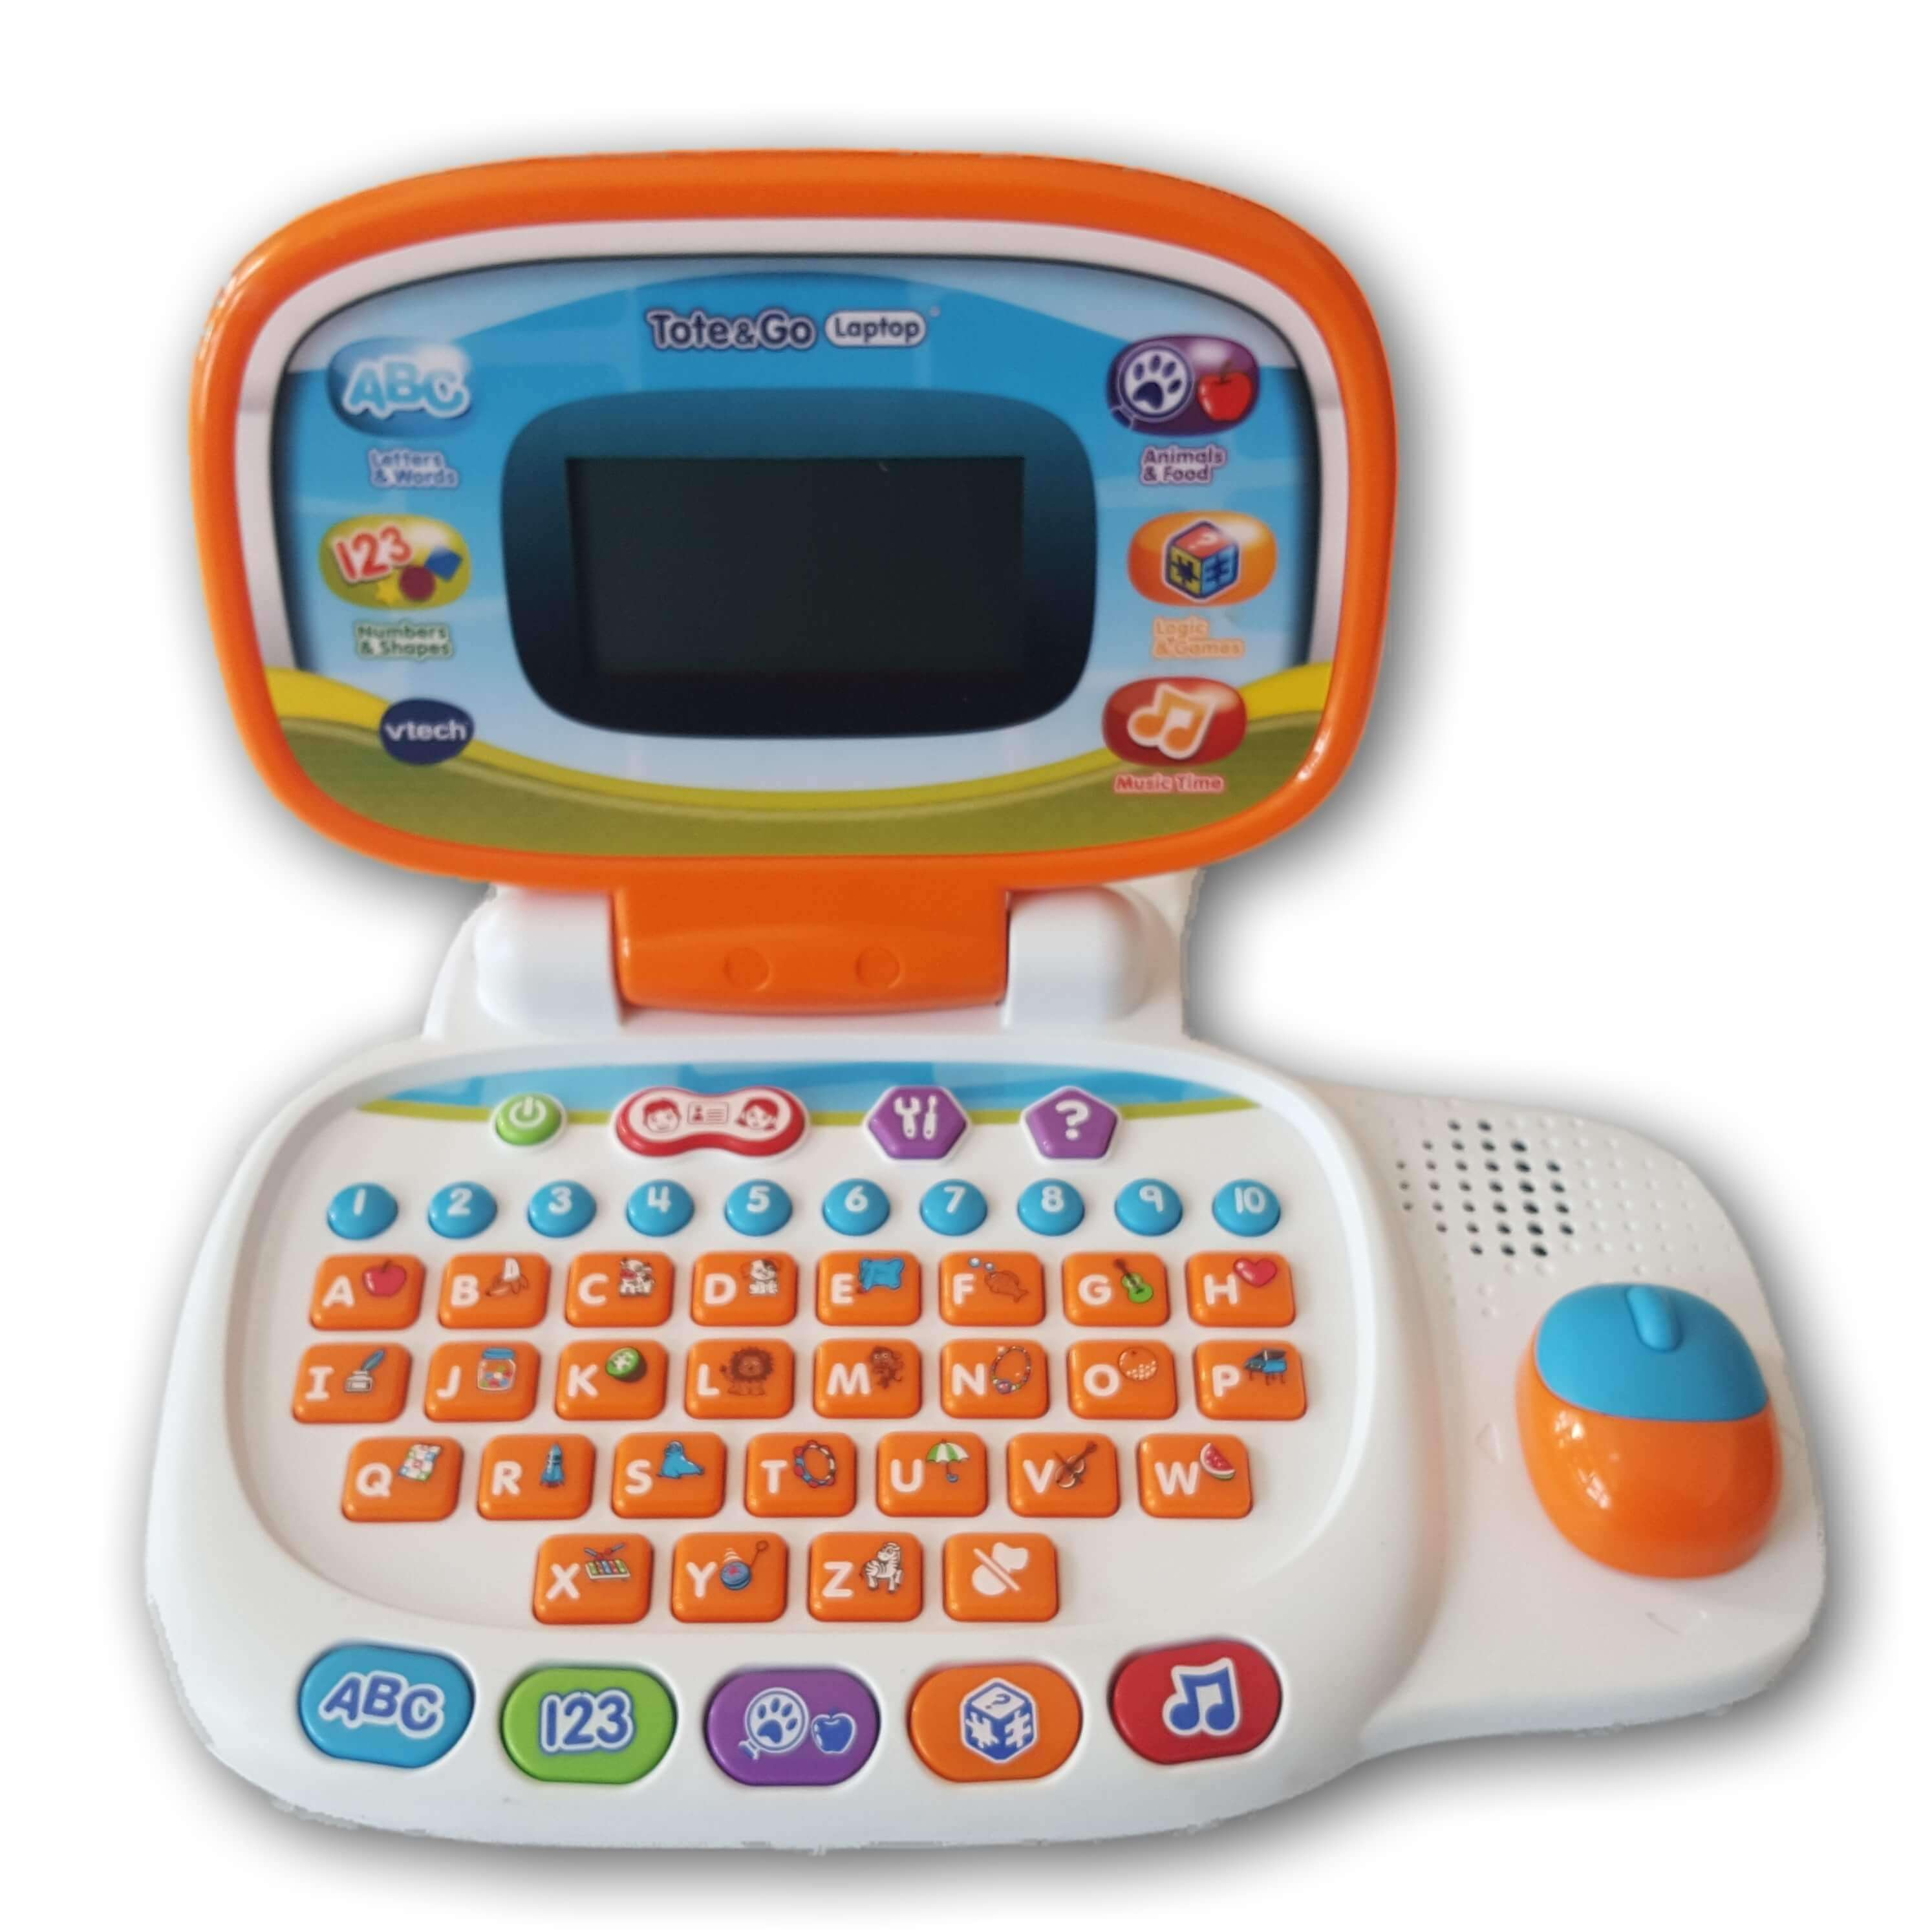 Vtech Tote 'n Go Laptop with Mouse for Ages 3 and UP New No Box